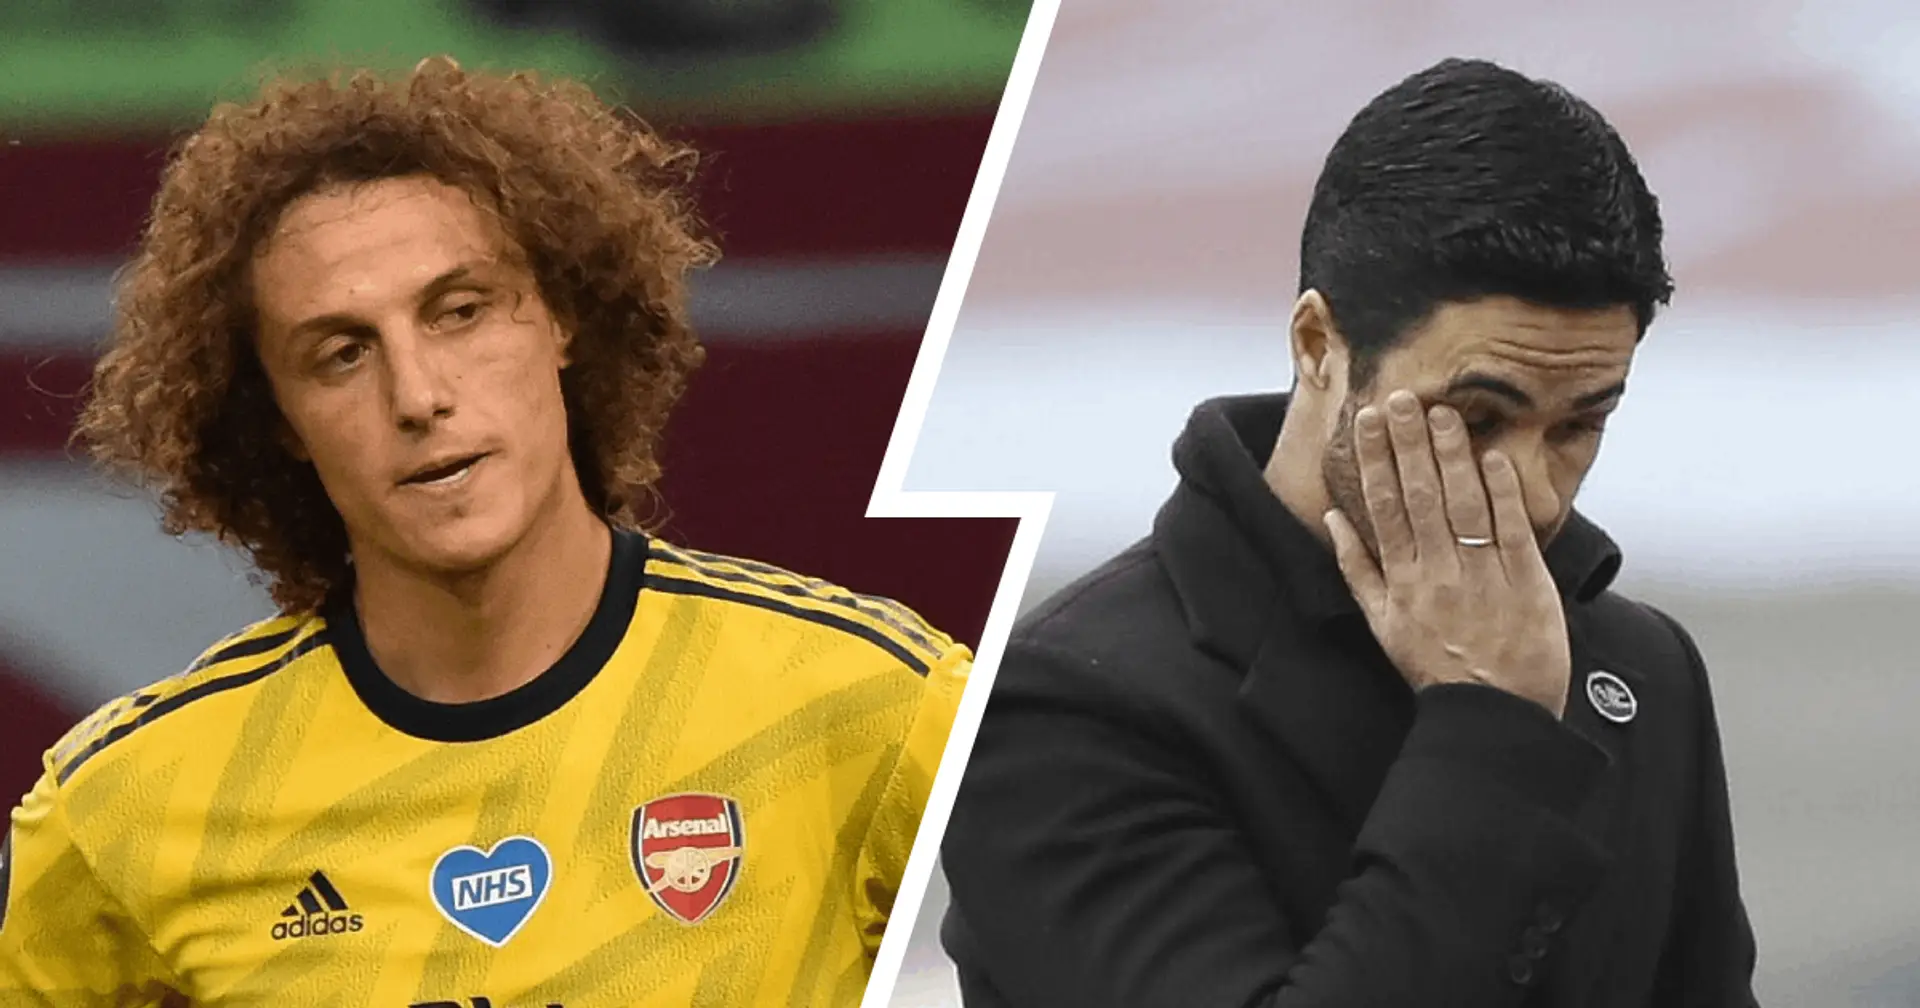 David Luiz set to leave Arsenal & 3 other stories you might have missed